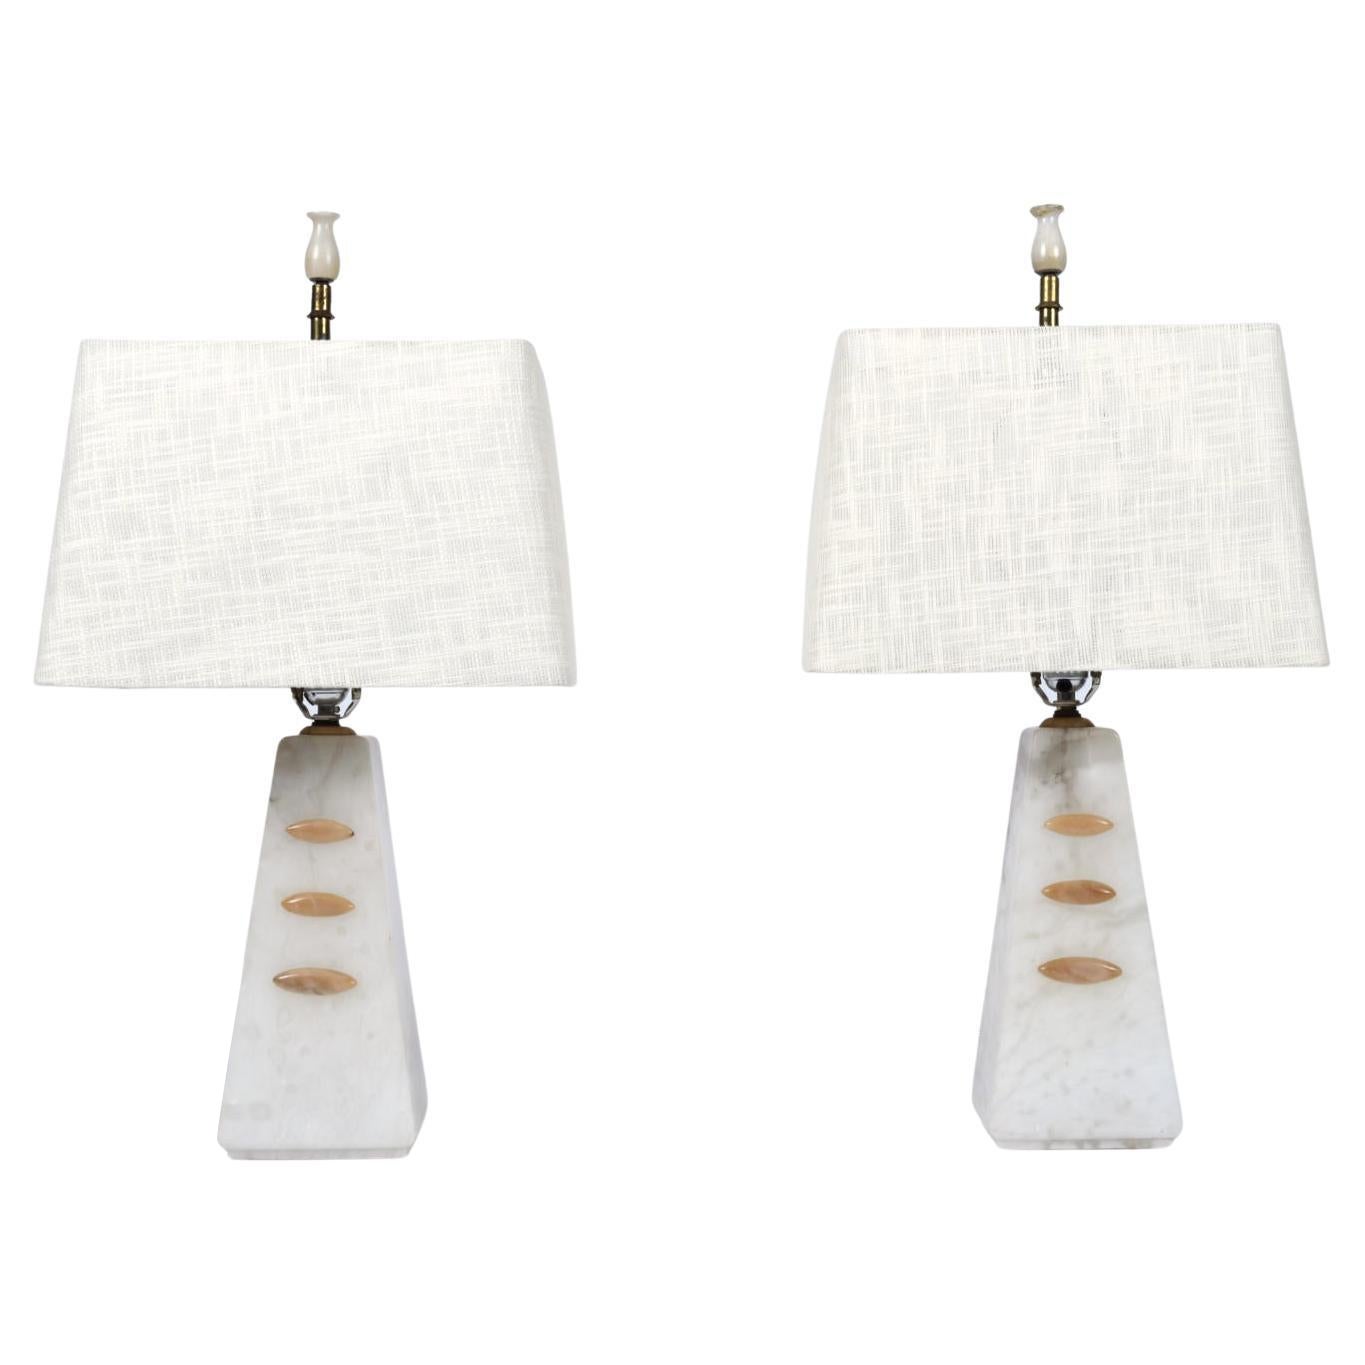 Alabaster Pyramid Table Lamps and Finials, Art Deco to Modern Transitional Style